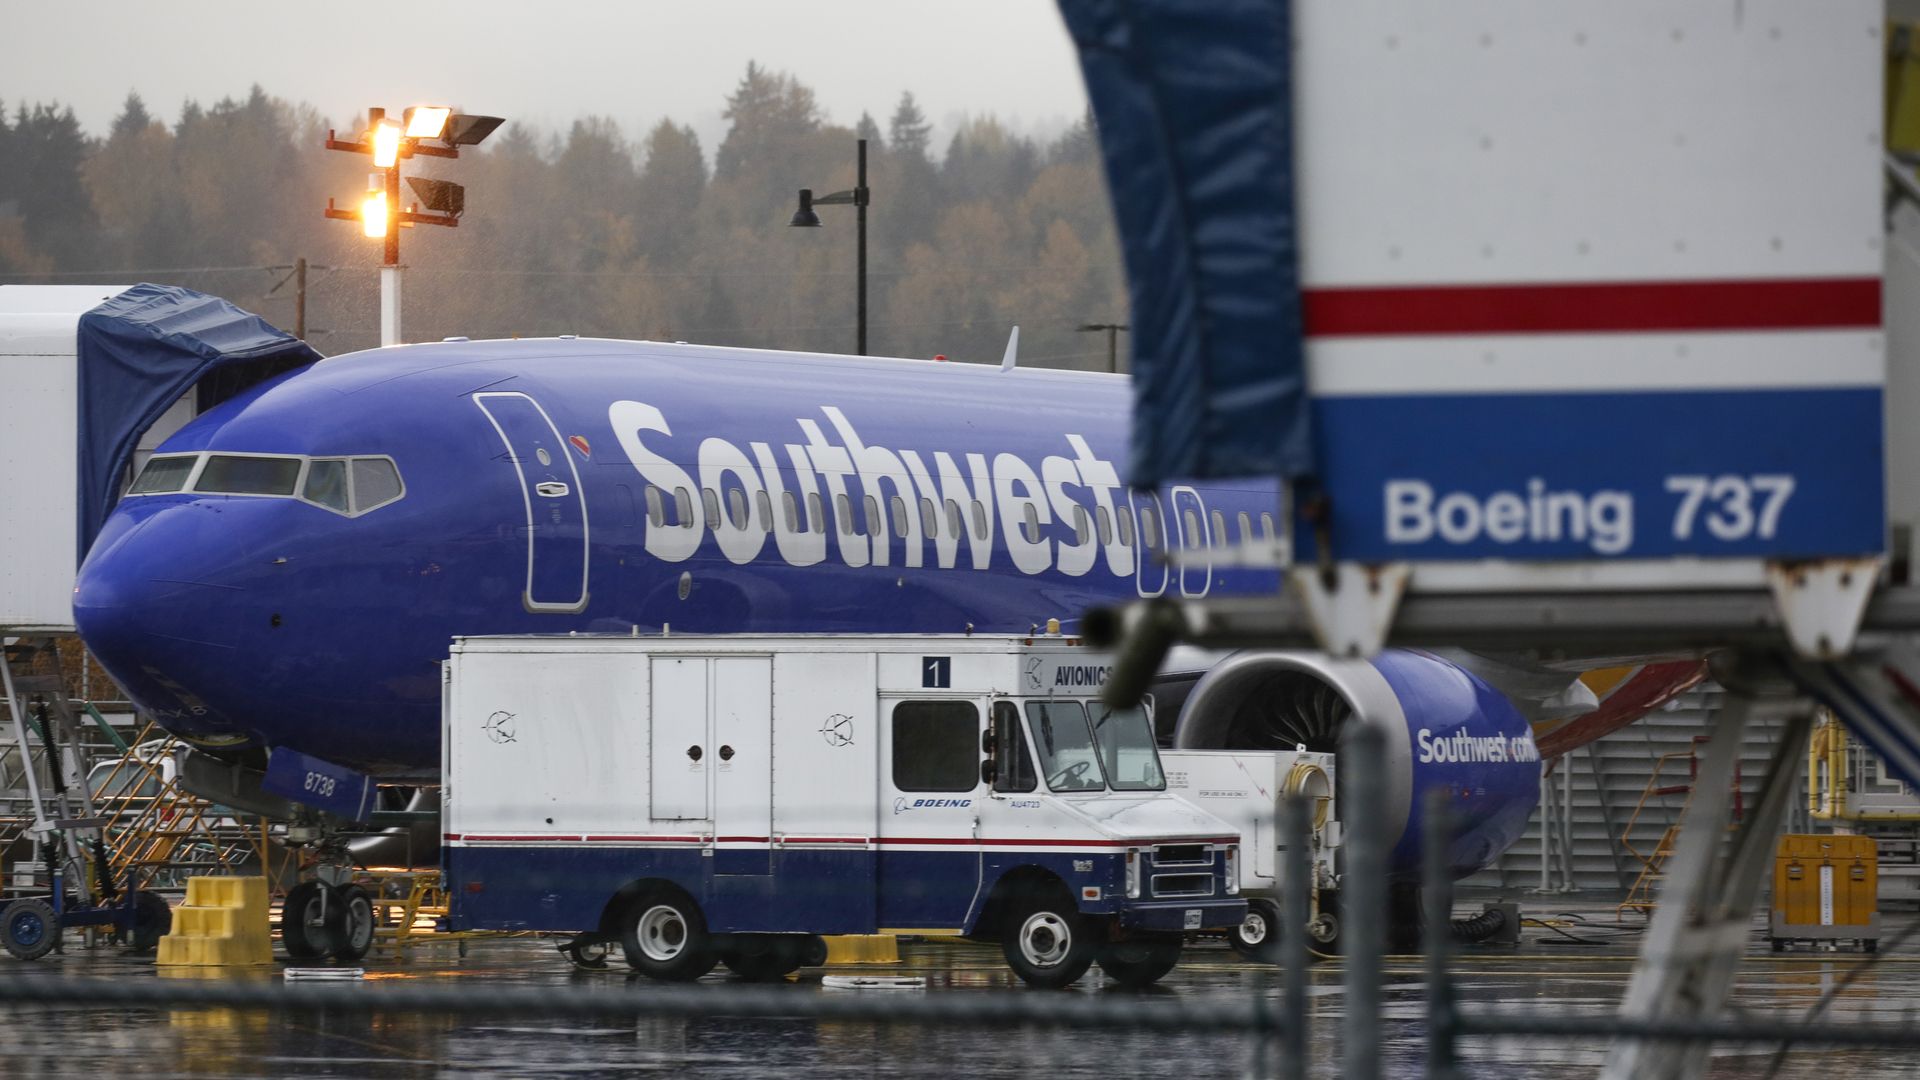 A Boeing 737 MAX airliner with Southwest Airlines markings at the Boeing Factory in Renton, Washington, in November 2020.